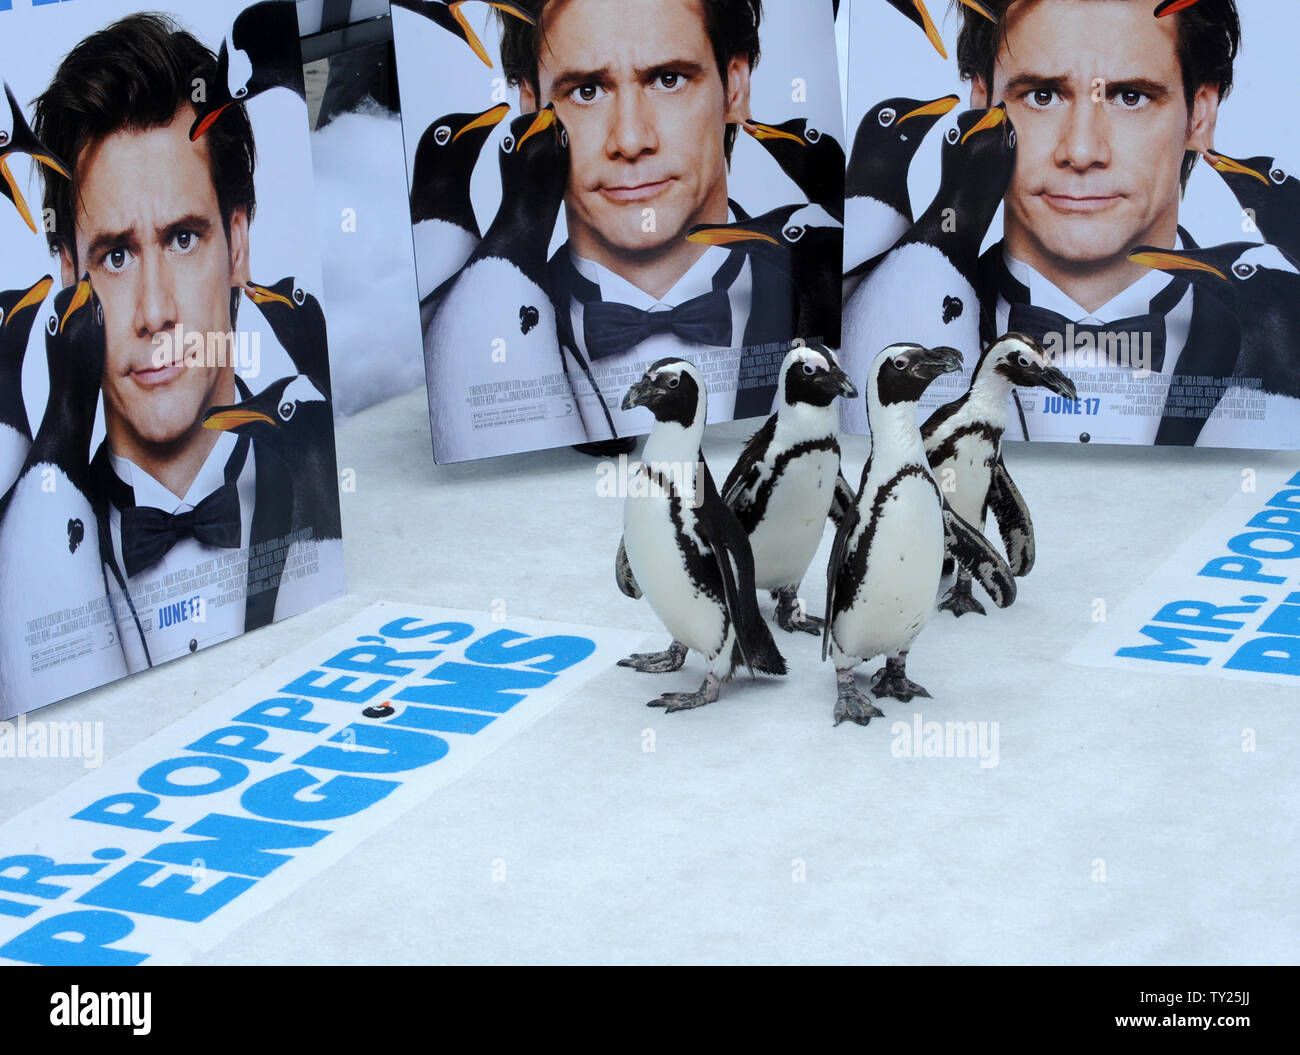 Penguins walk the carpet during premiere of the motion picture comedy 'Mr. Popper's Penguins', at Grauman's Chinese Theatre in the Hollywood section of Los Angeles on June 12, 2011.   UPI/Jim Ruymen Stock Photo